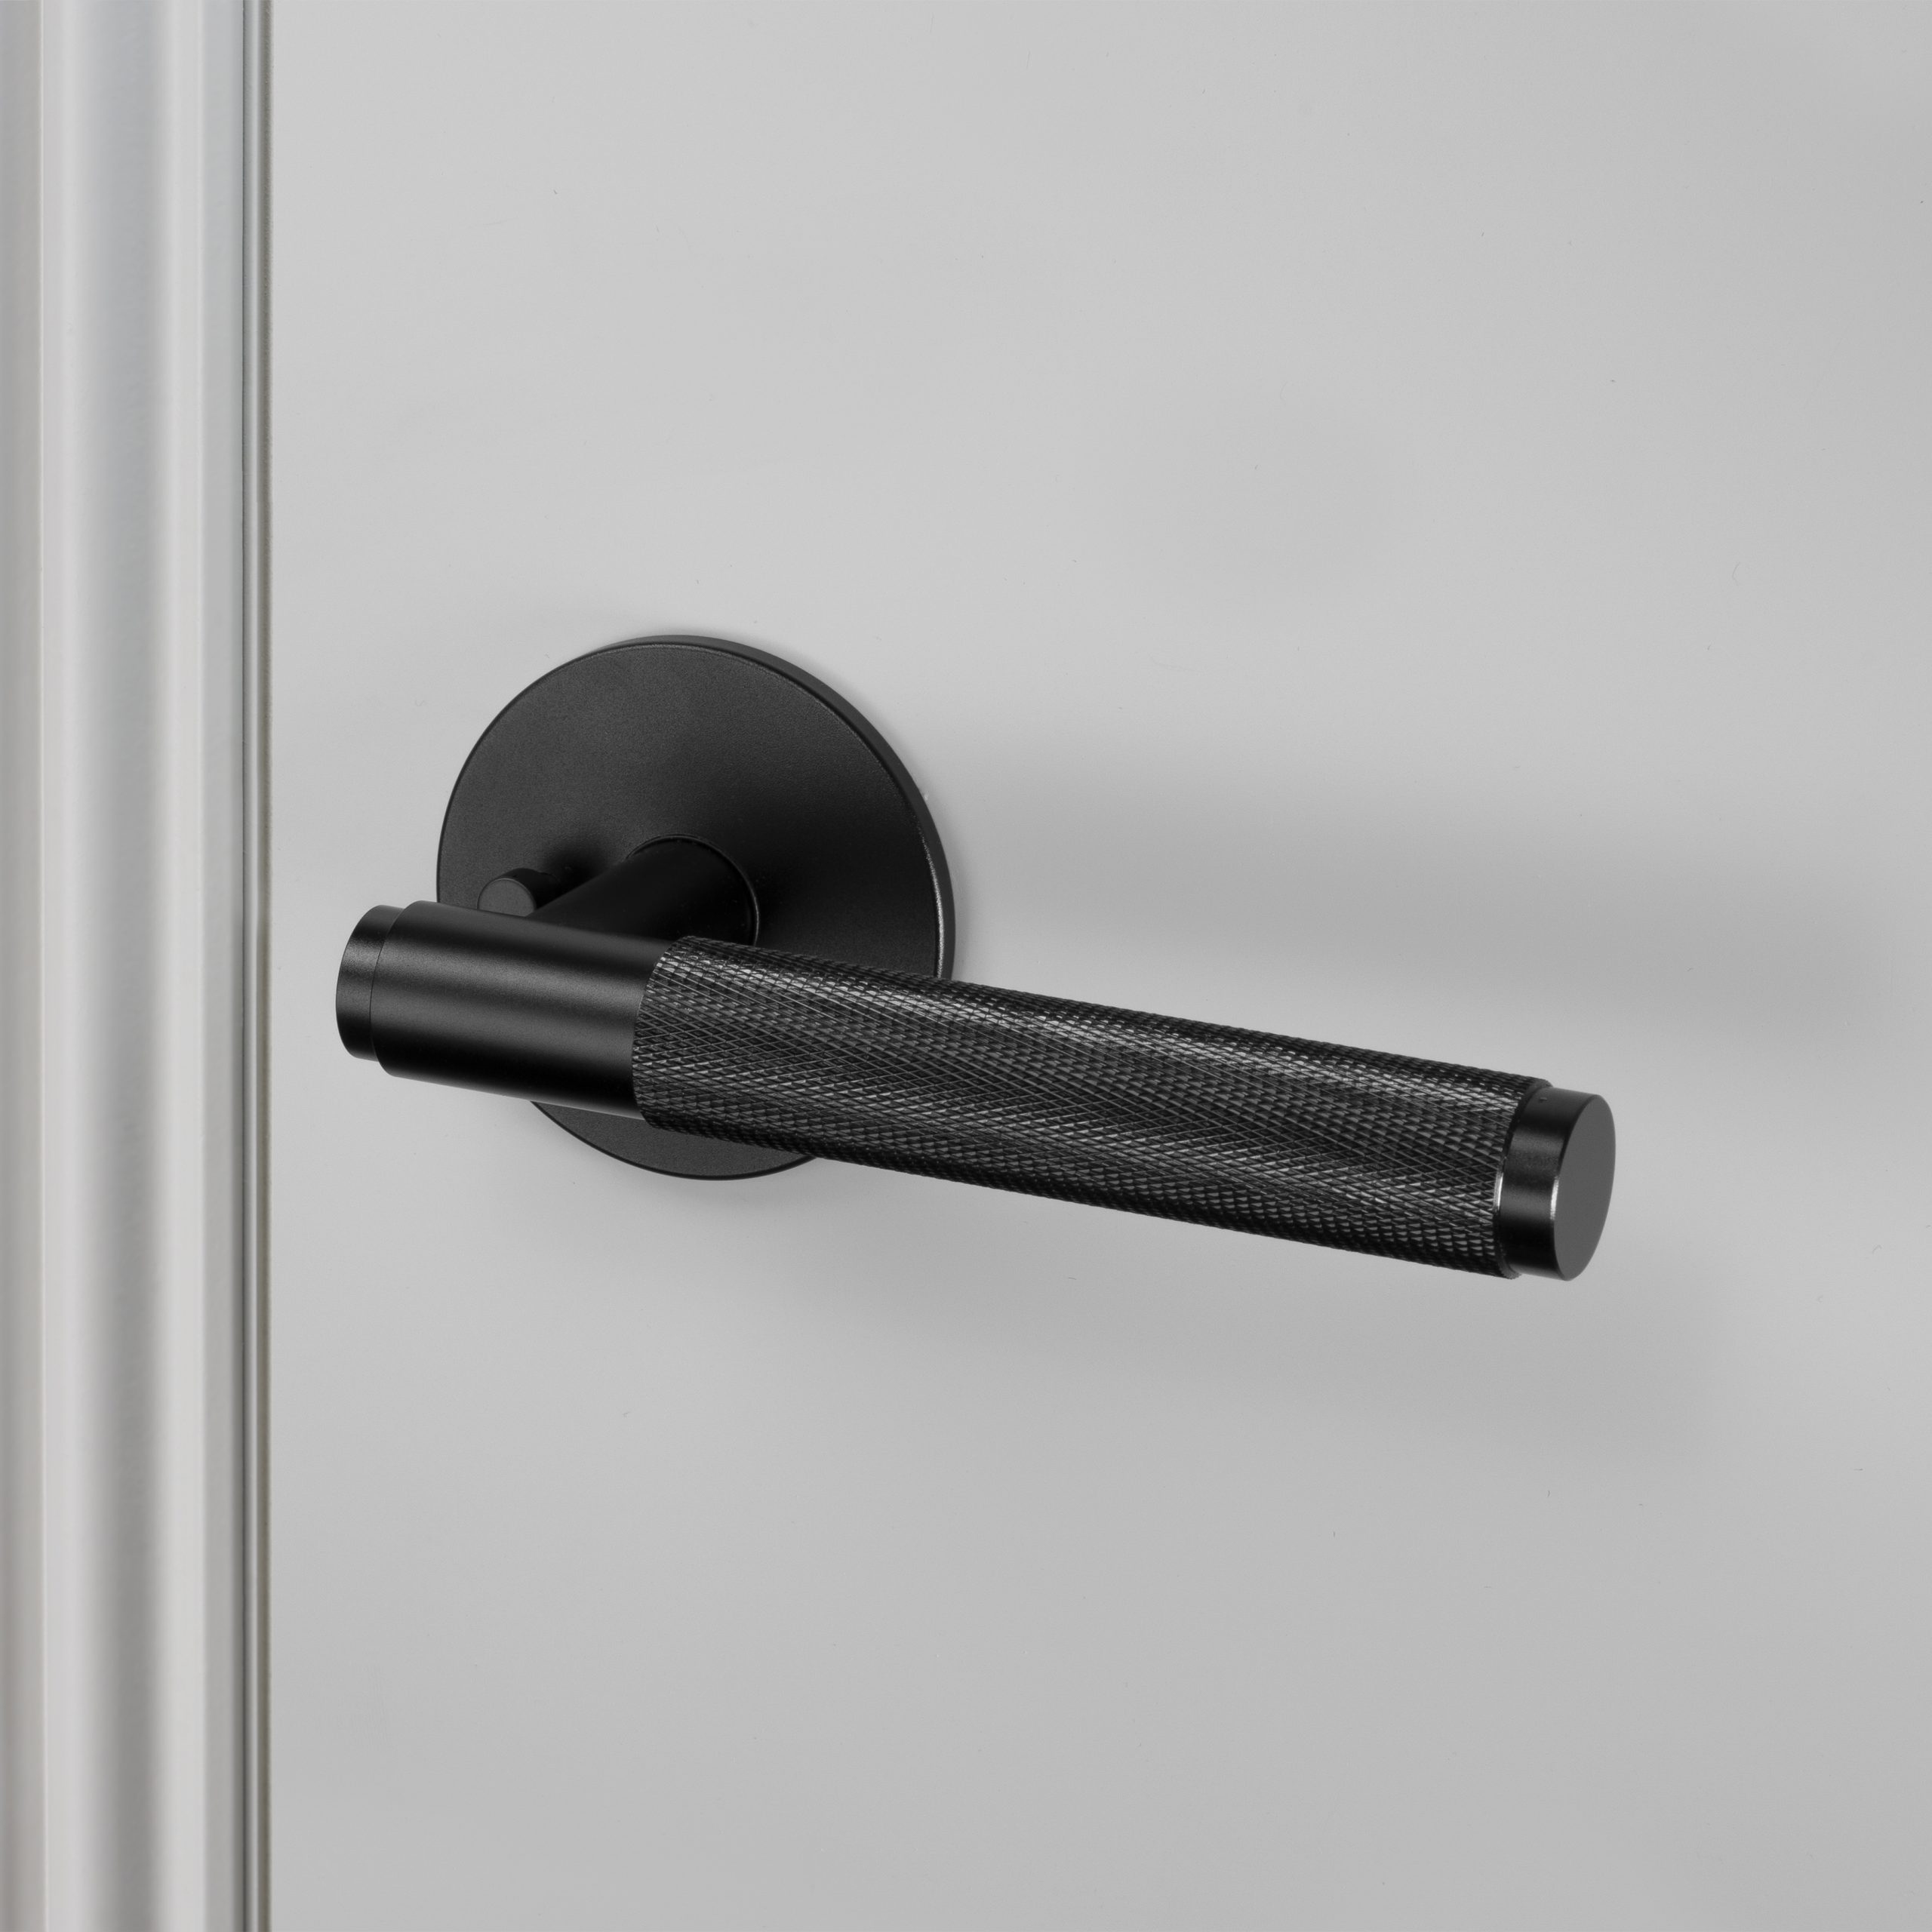 https://www.busterandpunch.com/us/wp-content/uploads/sites/2/2020/03/1.-Door_Handle_Right_Privacy_Black-scaled.jpg